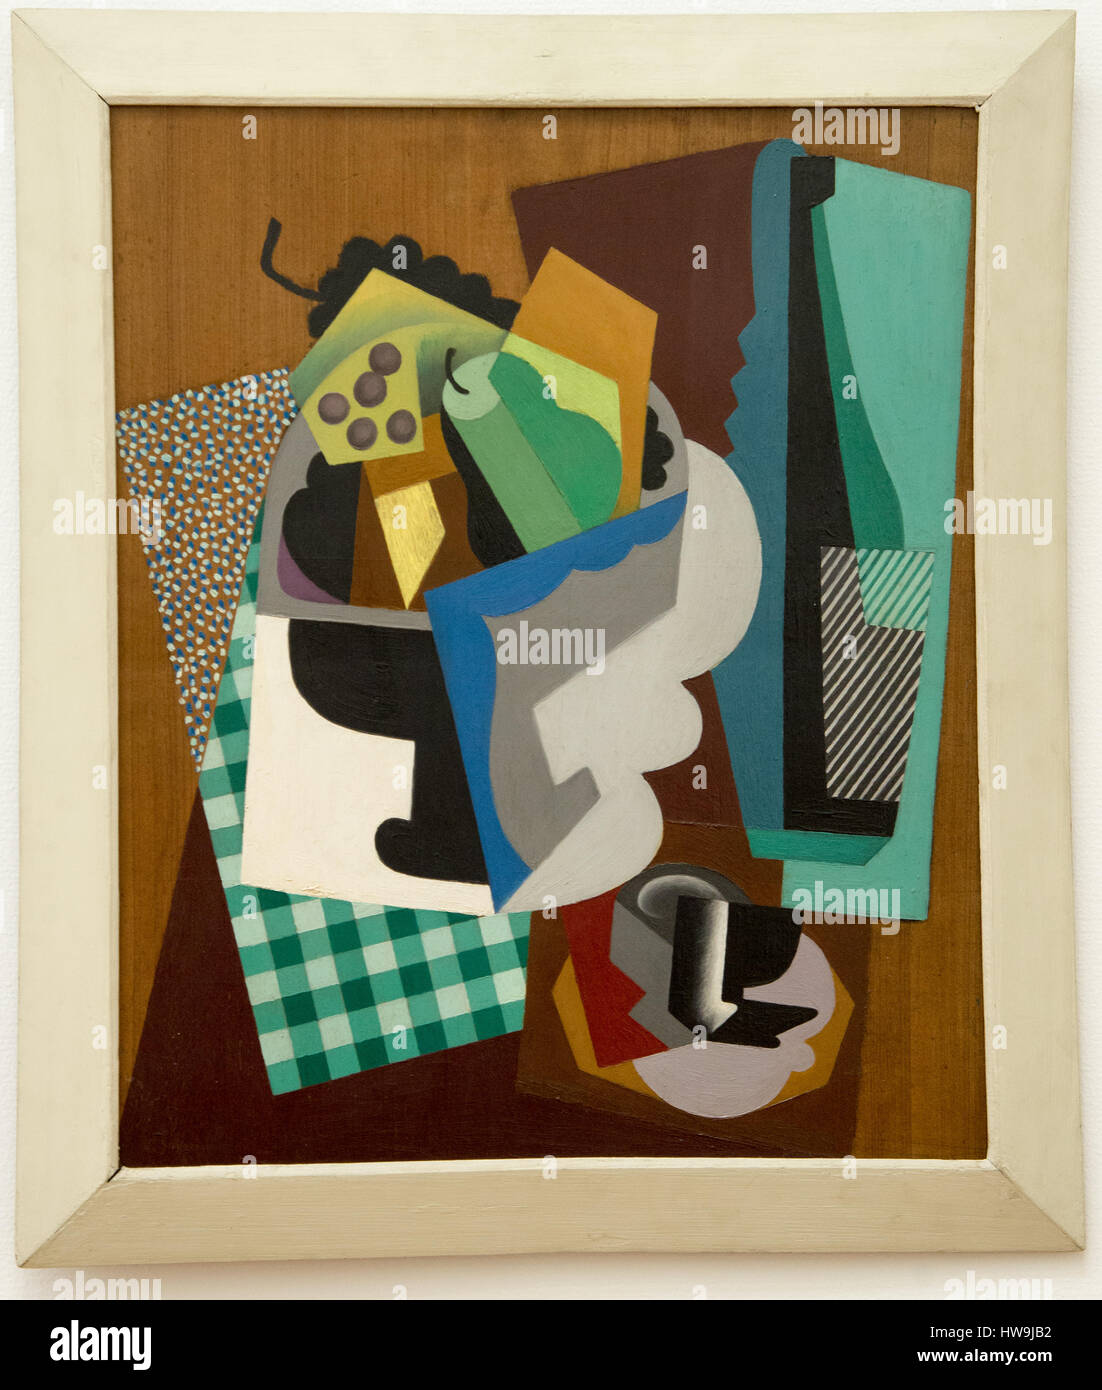 'fruit bowl' by gino severin Stock Photo